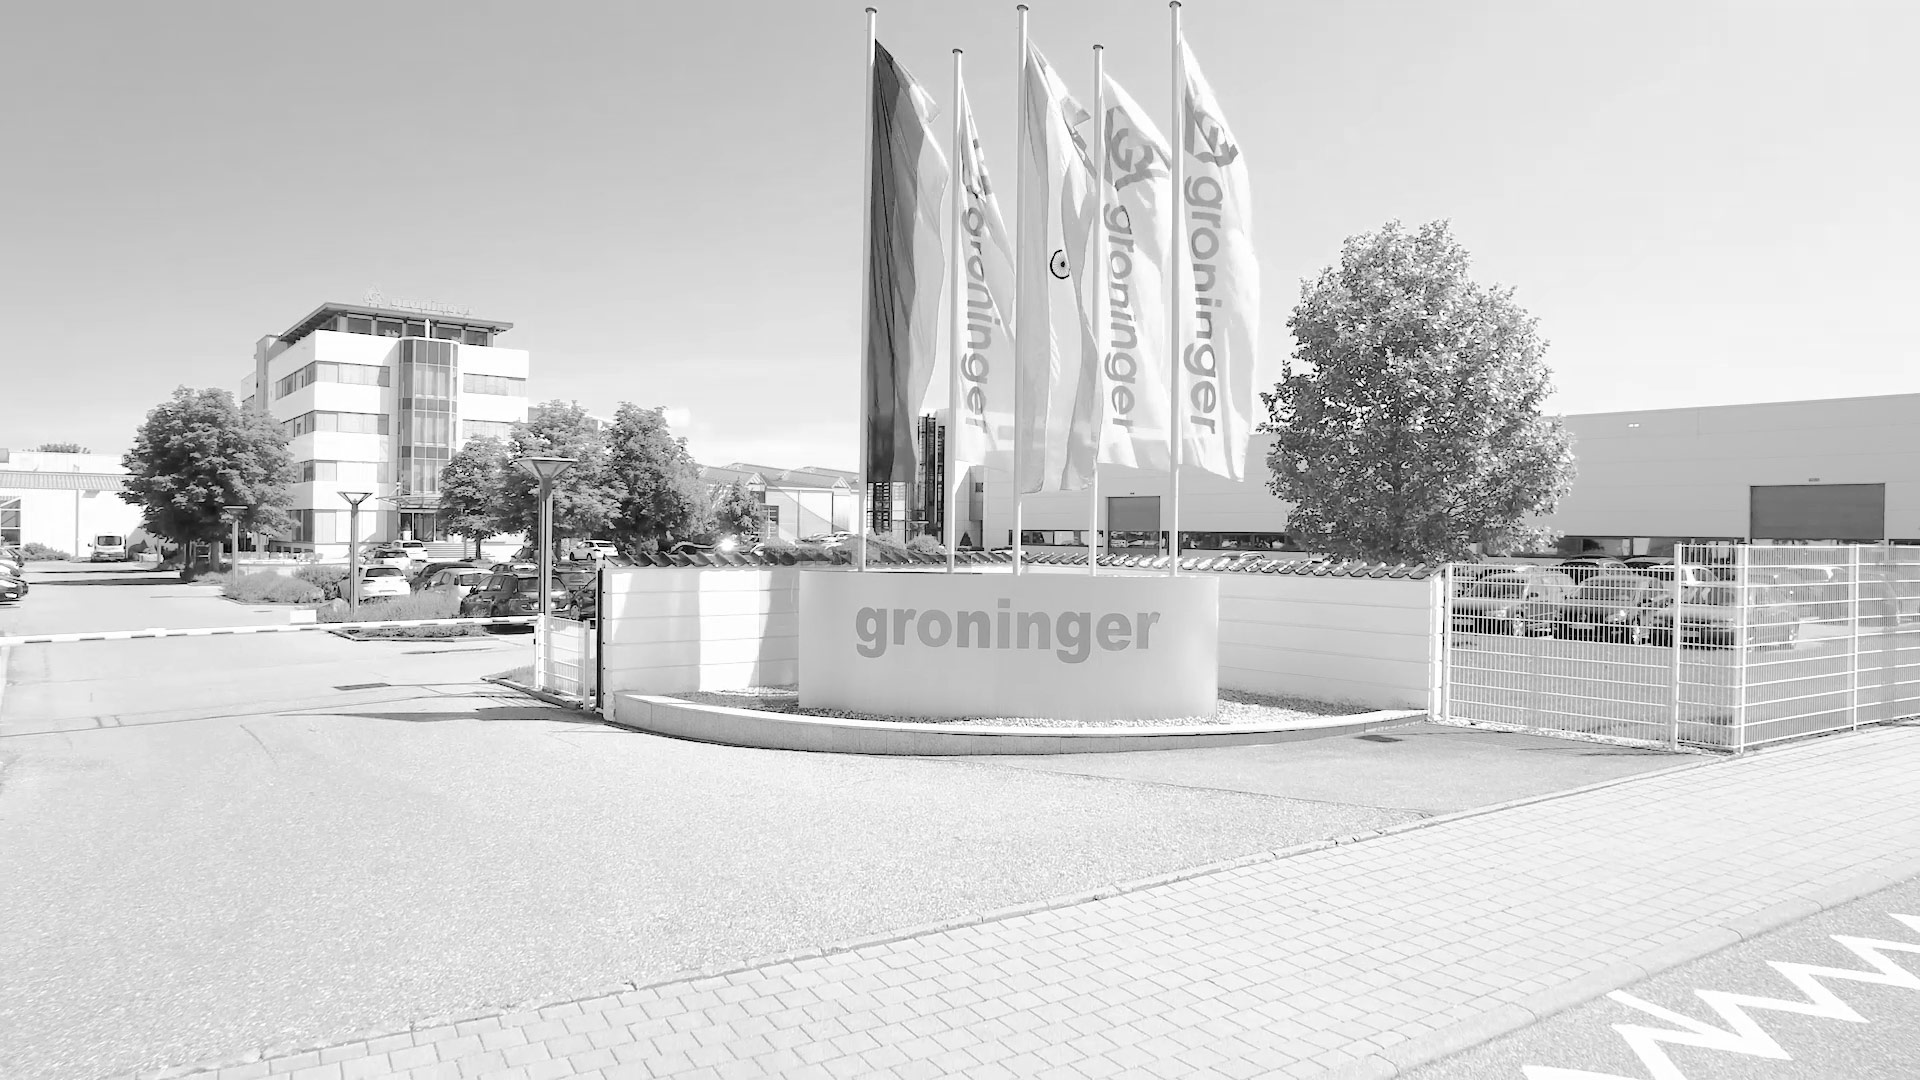 Events & Conferences with and from groninger